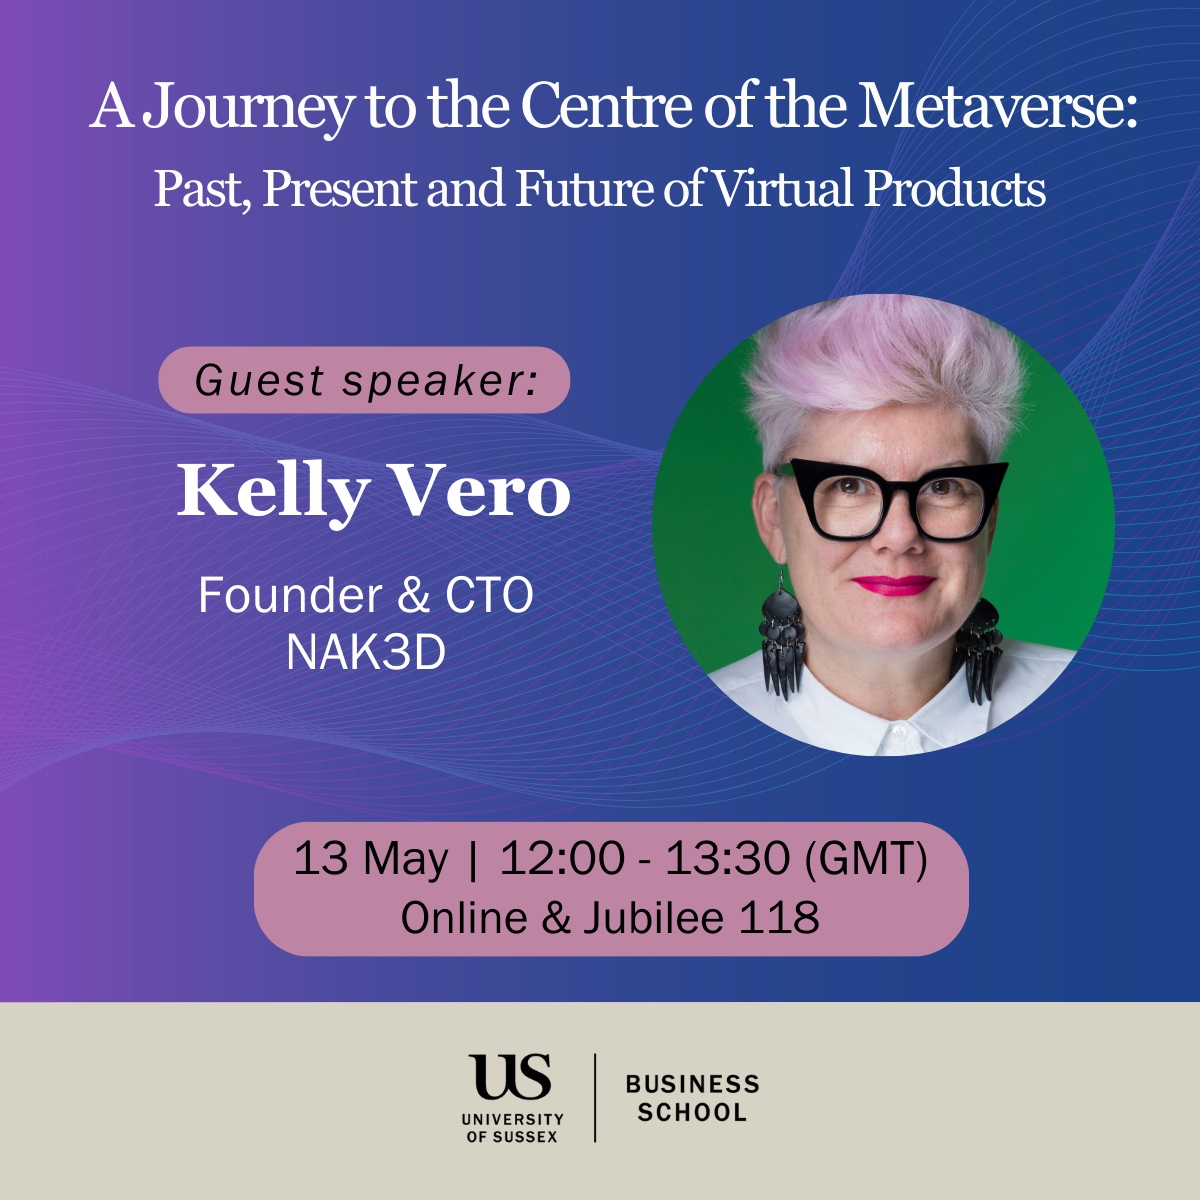 Join us on Monday 13 May for 'A journey to the Centre of the Metaverse', an exploration of the digital frontiers with guest speaker Kelly Vero, hosted by Maria Restuccia. Secure a spot: bit.ly/4dsrpoi #Metaverse #Technology #Innovation